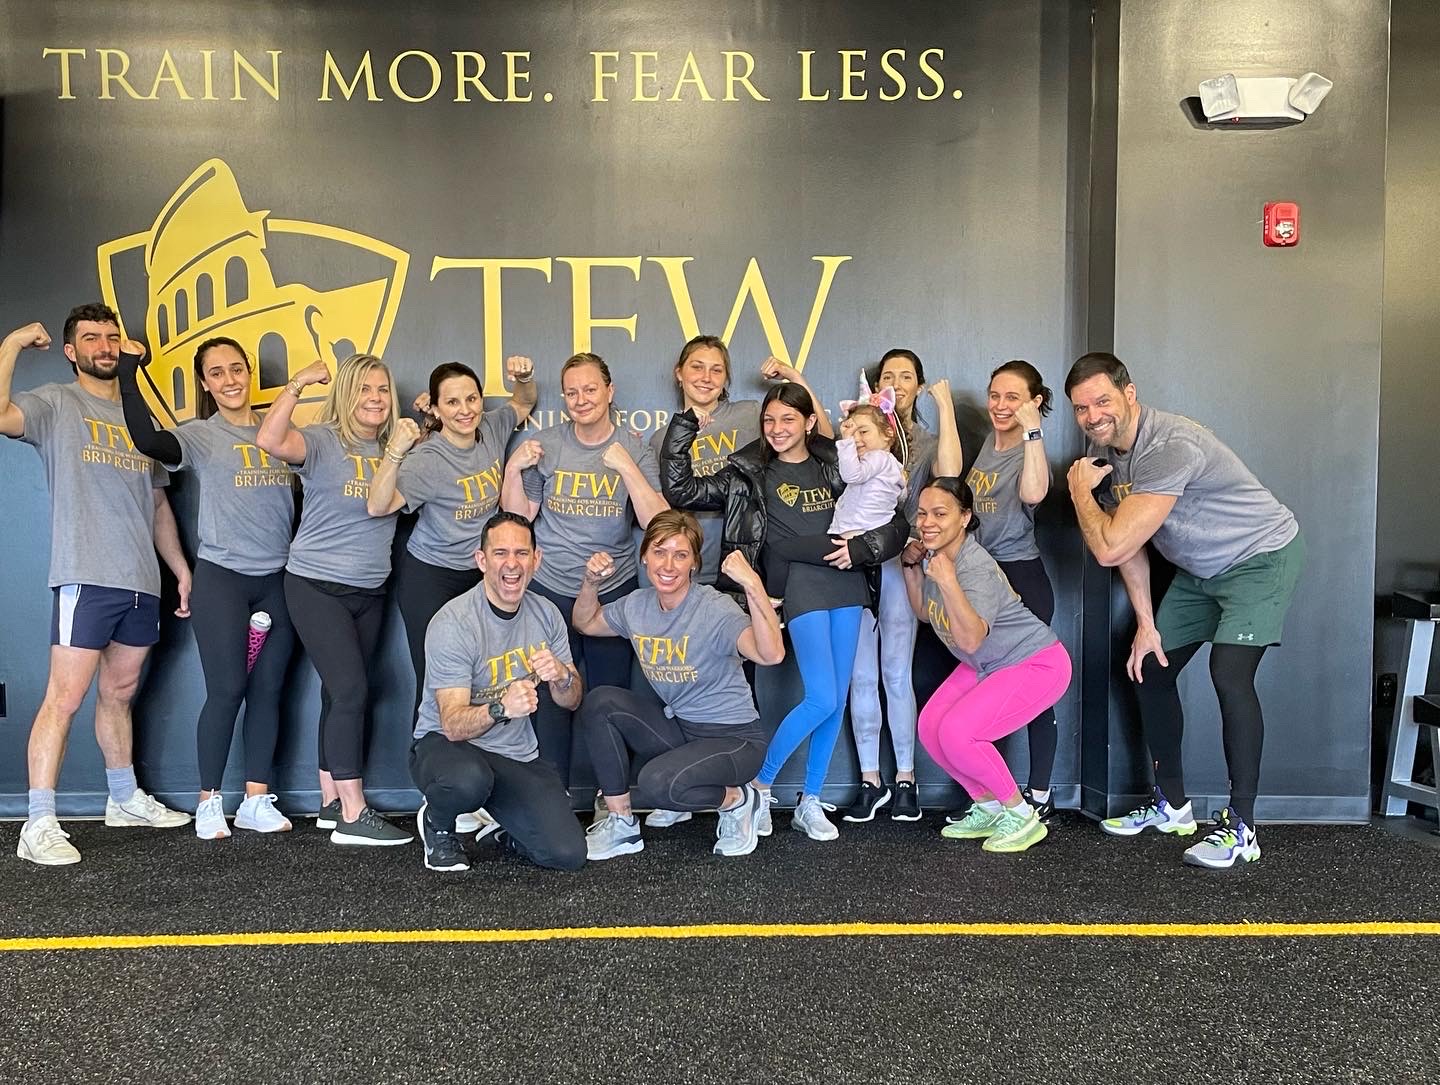 Private training fitness classes at TFW Briarcliff